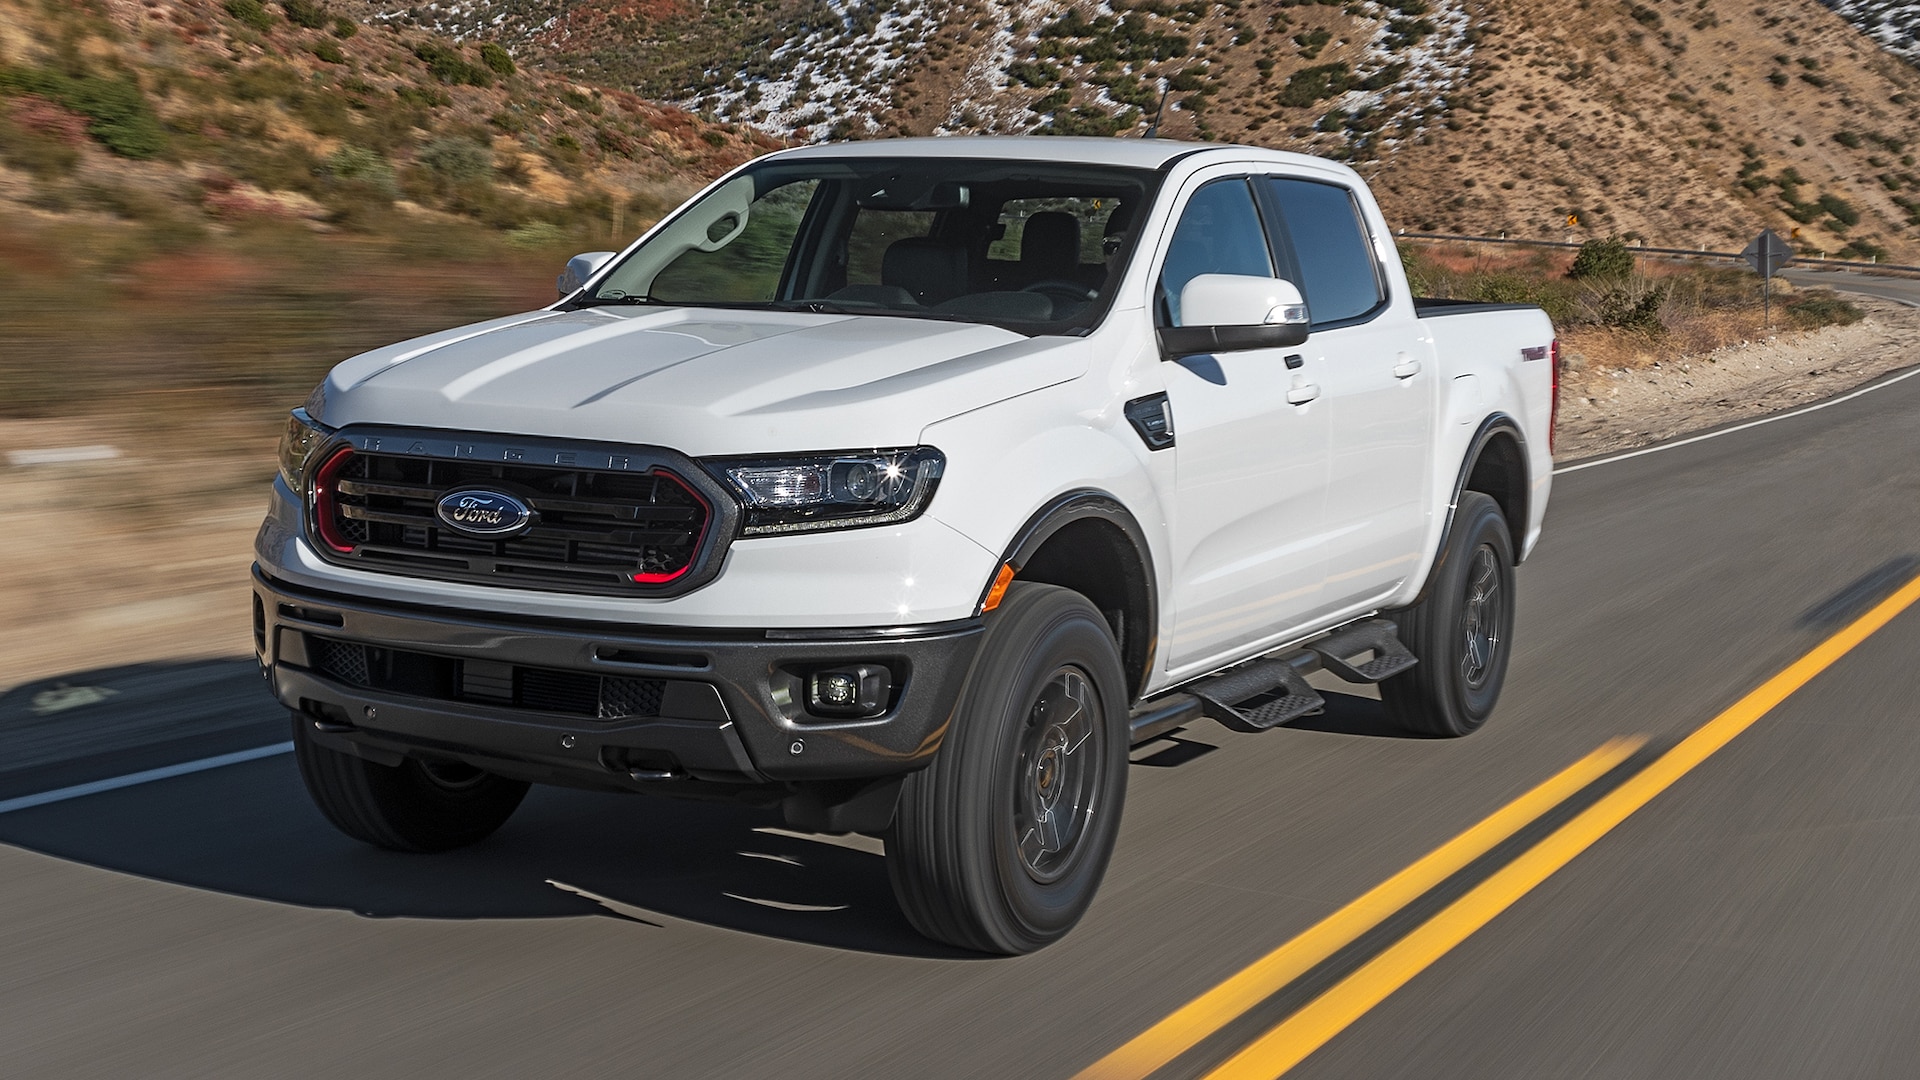 2021 Ford Ranger Tremor First Test: One Tough Truck